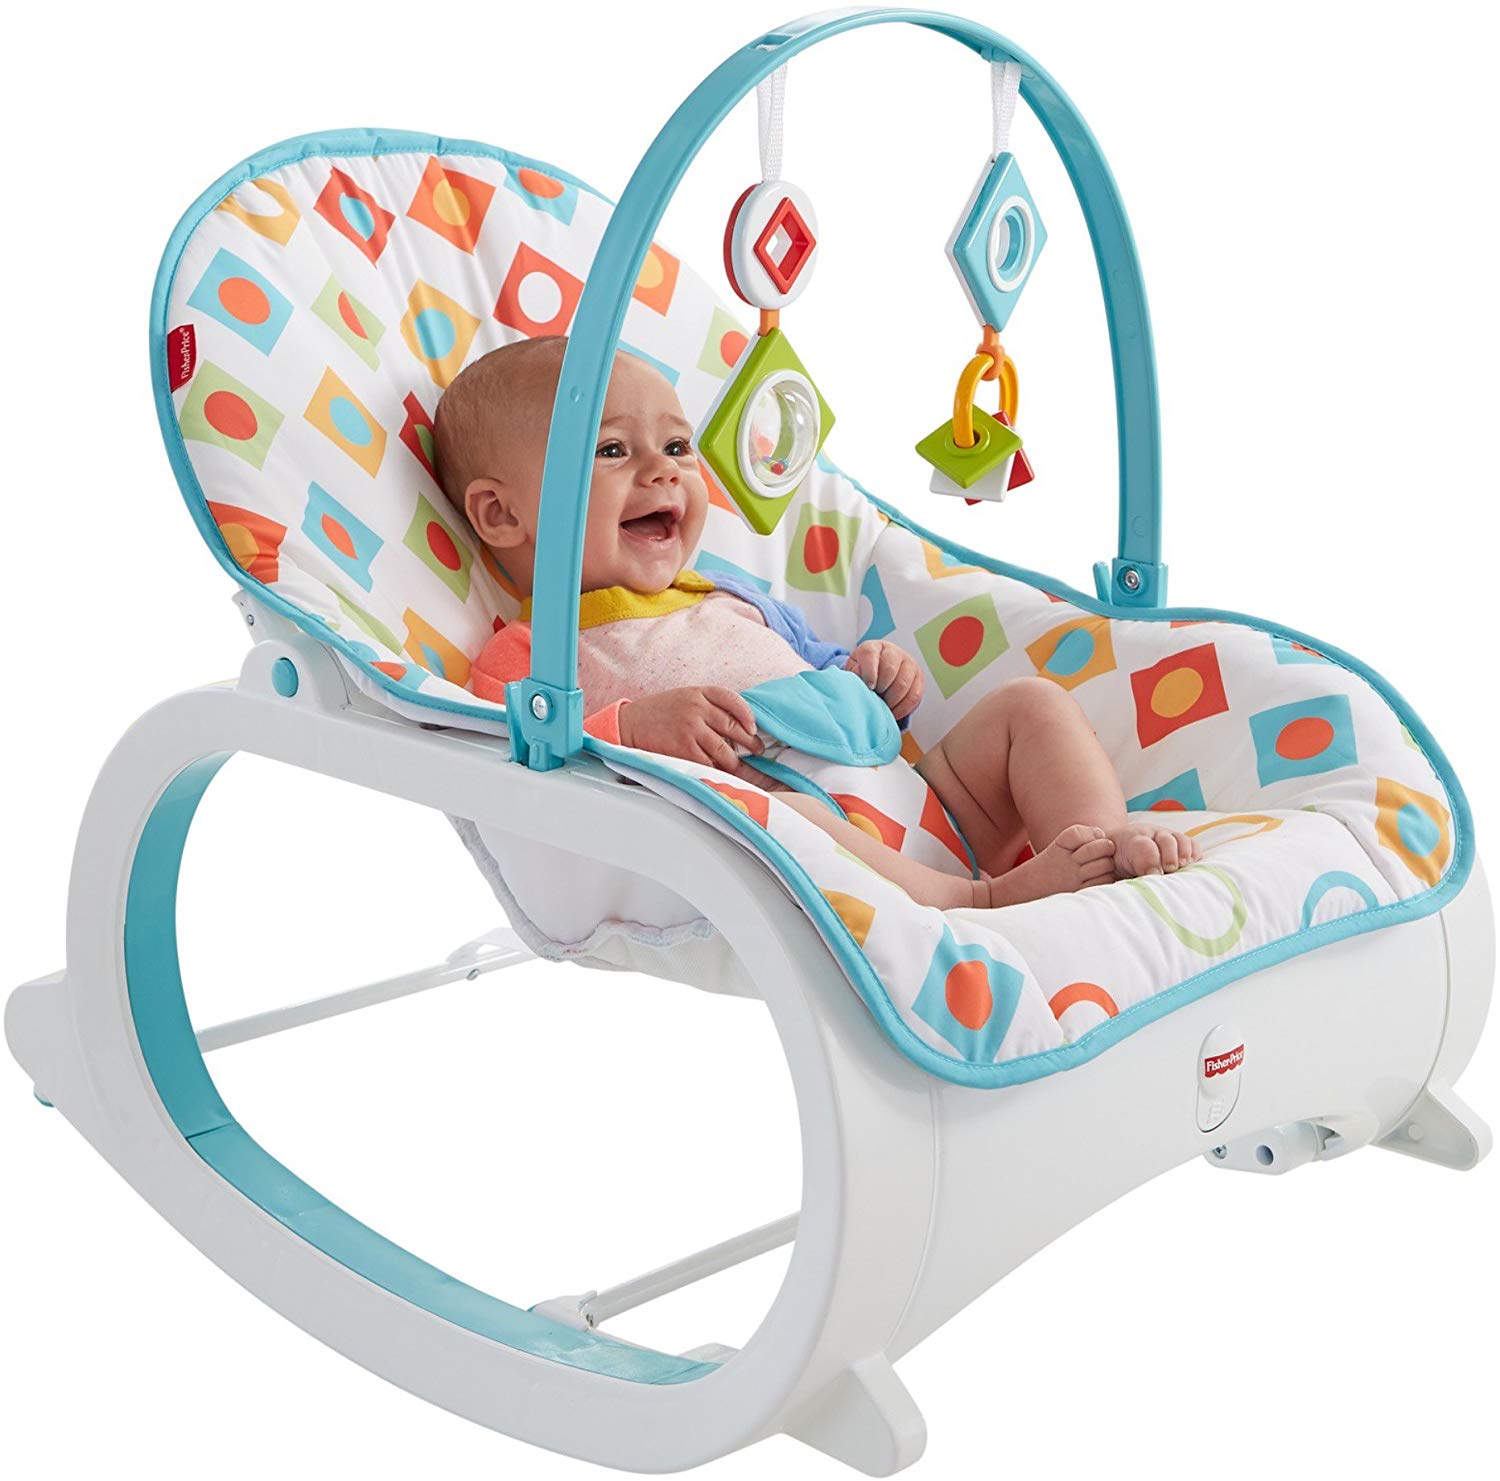 Review of Fisher-Price Infant-to-Toddler Rocker - Geo Diamonds